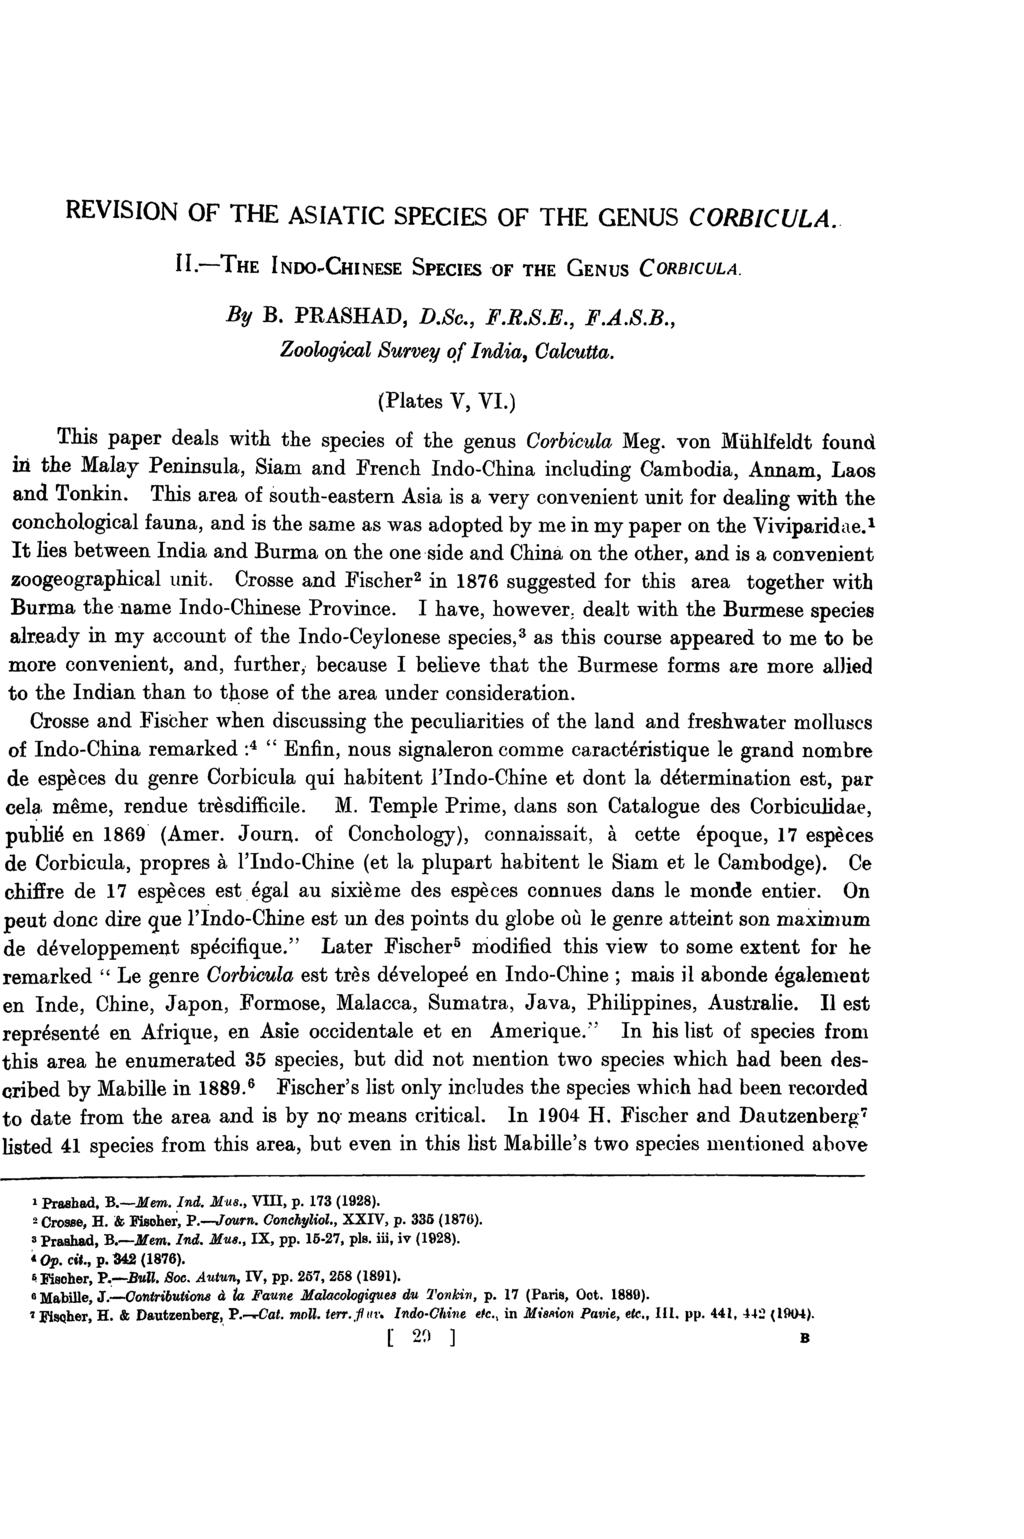 REVISION OF THE ASIATIC SPECIES OF THE GENUS CORBICULA.. II.-THE INOO... CHINESE SPECIES 'OF THE GENUS CORBICULA. By B. PRASHAD, D.Se., F.R.S.E., F.A.S.B., Zoological Survey of India, Oalcutta.